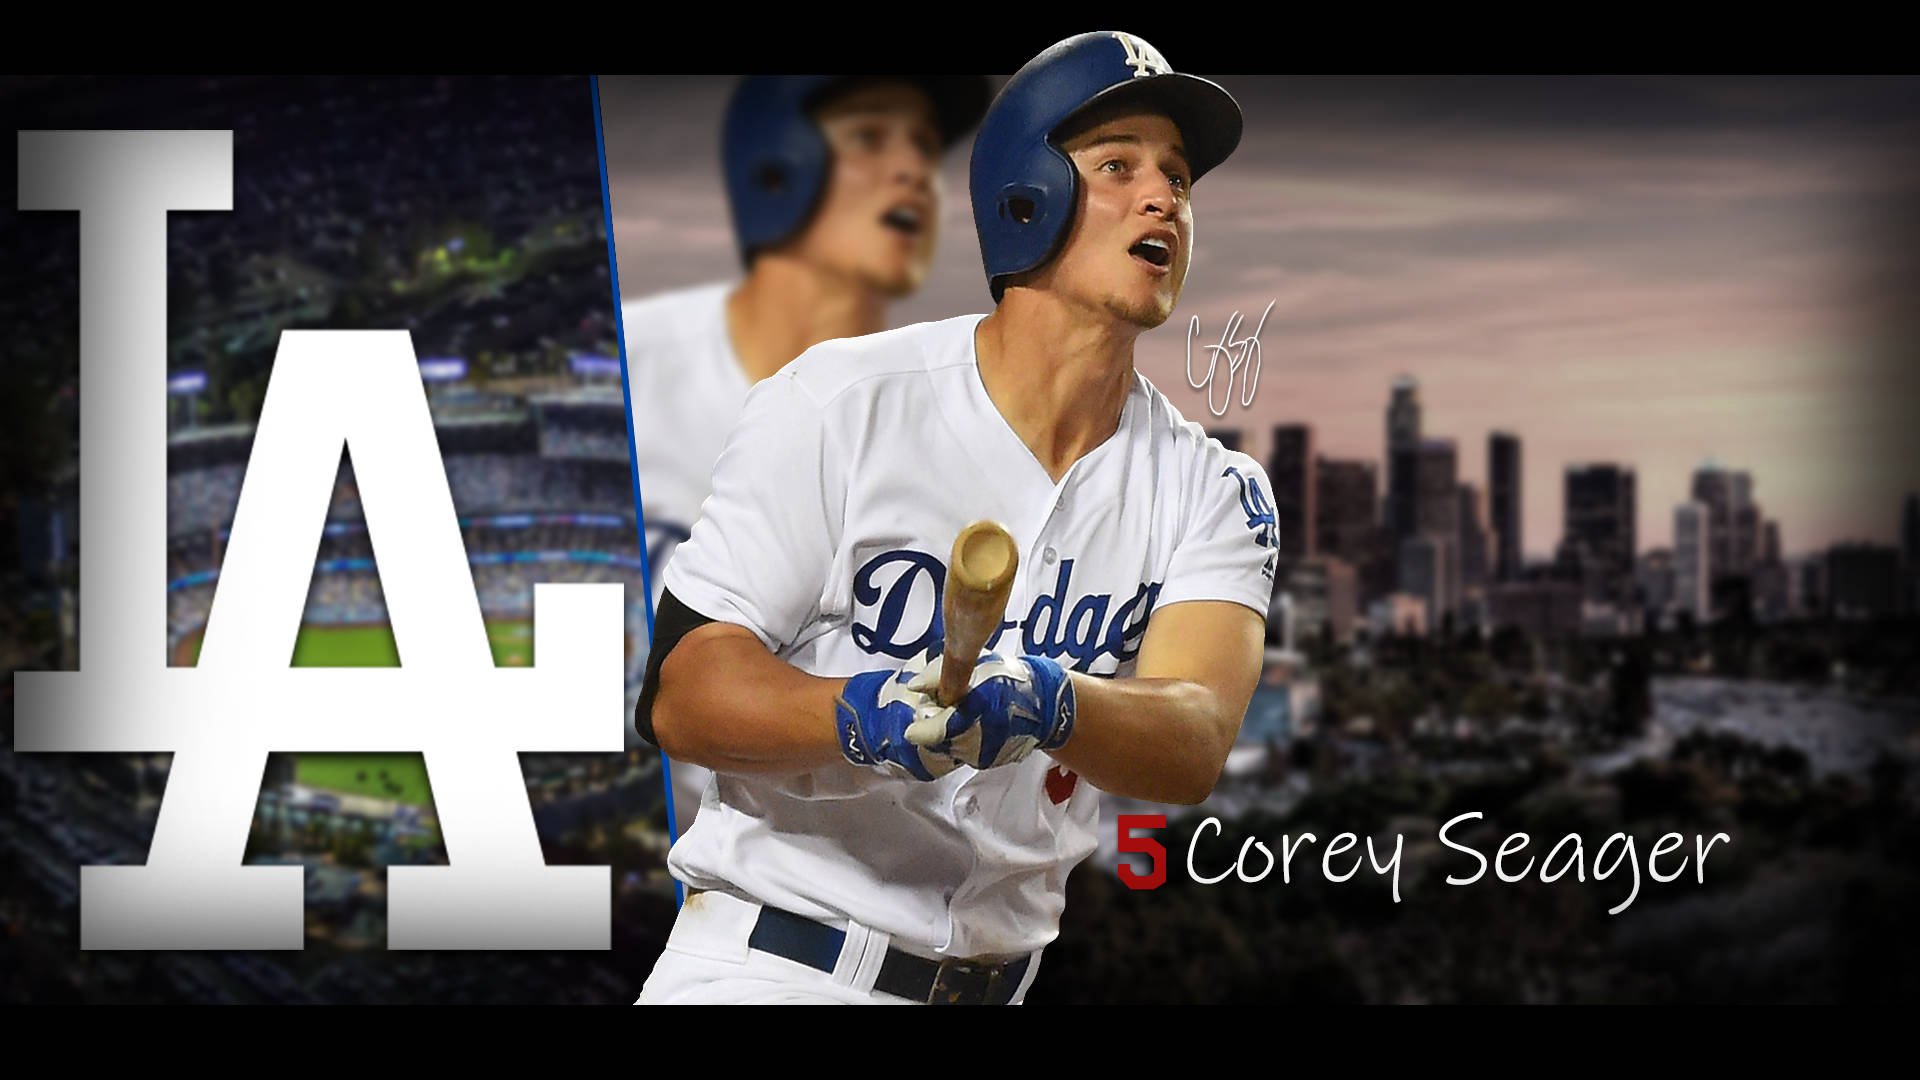 Corey Seager In Action At The Pitch Wallpaper